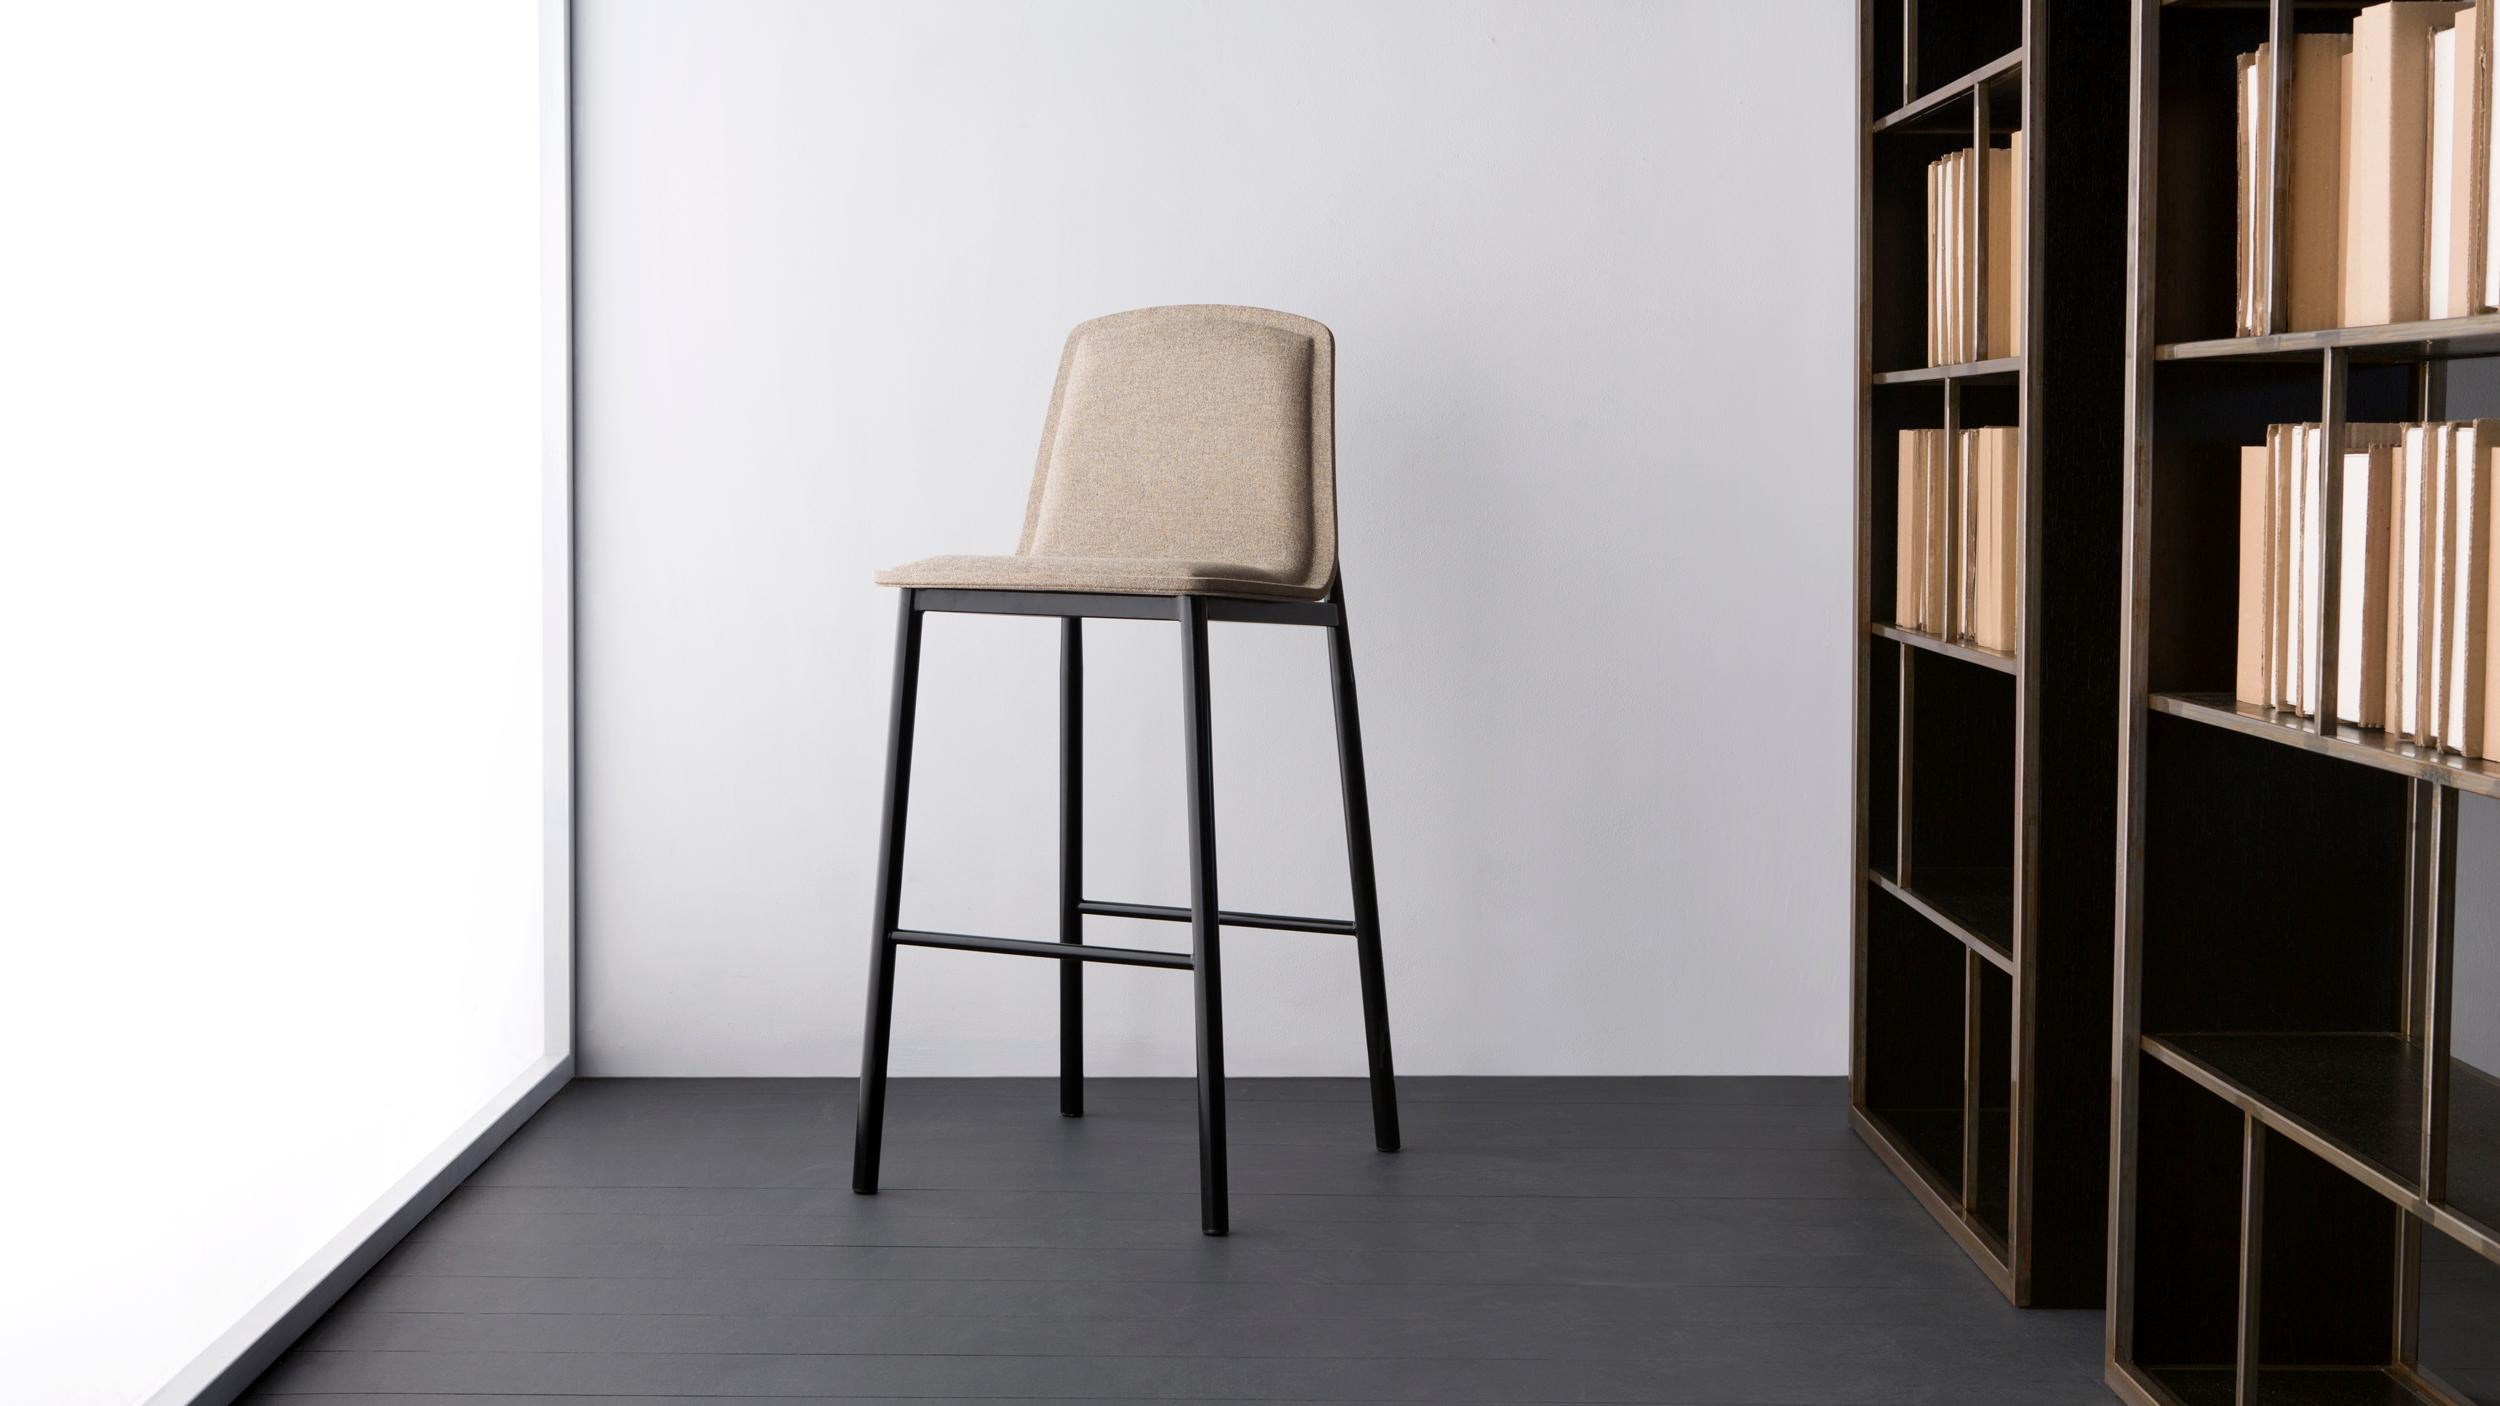 High Moi Bar Stool by Doimo Brasil
Dimensions: W 51 x D 58 x H 109 cm 
Materials: Metal, Fabric.

Also available in W 51 x D 58 x H 93 cm, Seat Height: 60 cm. 

With the intention of providing good taste and personality, Doimo deciphers trends and